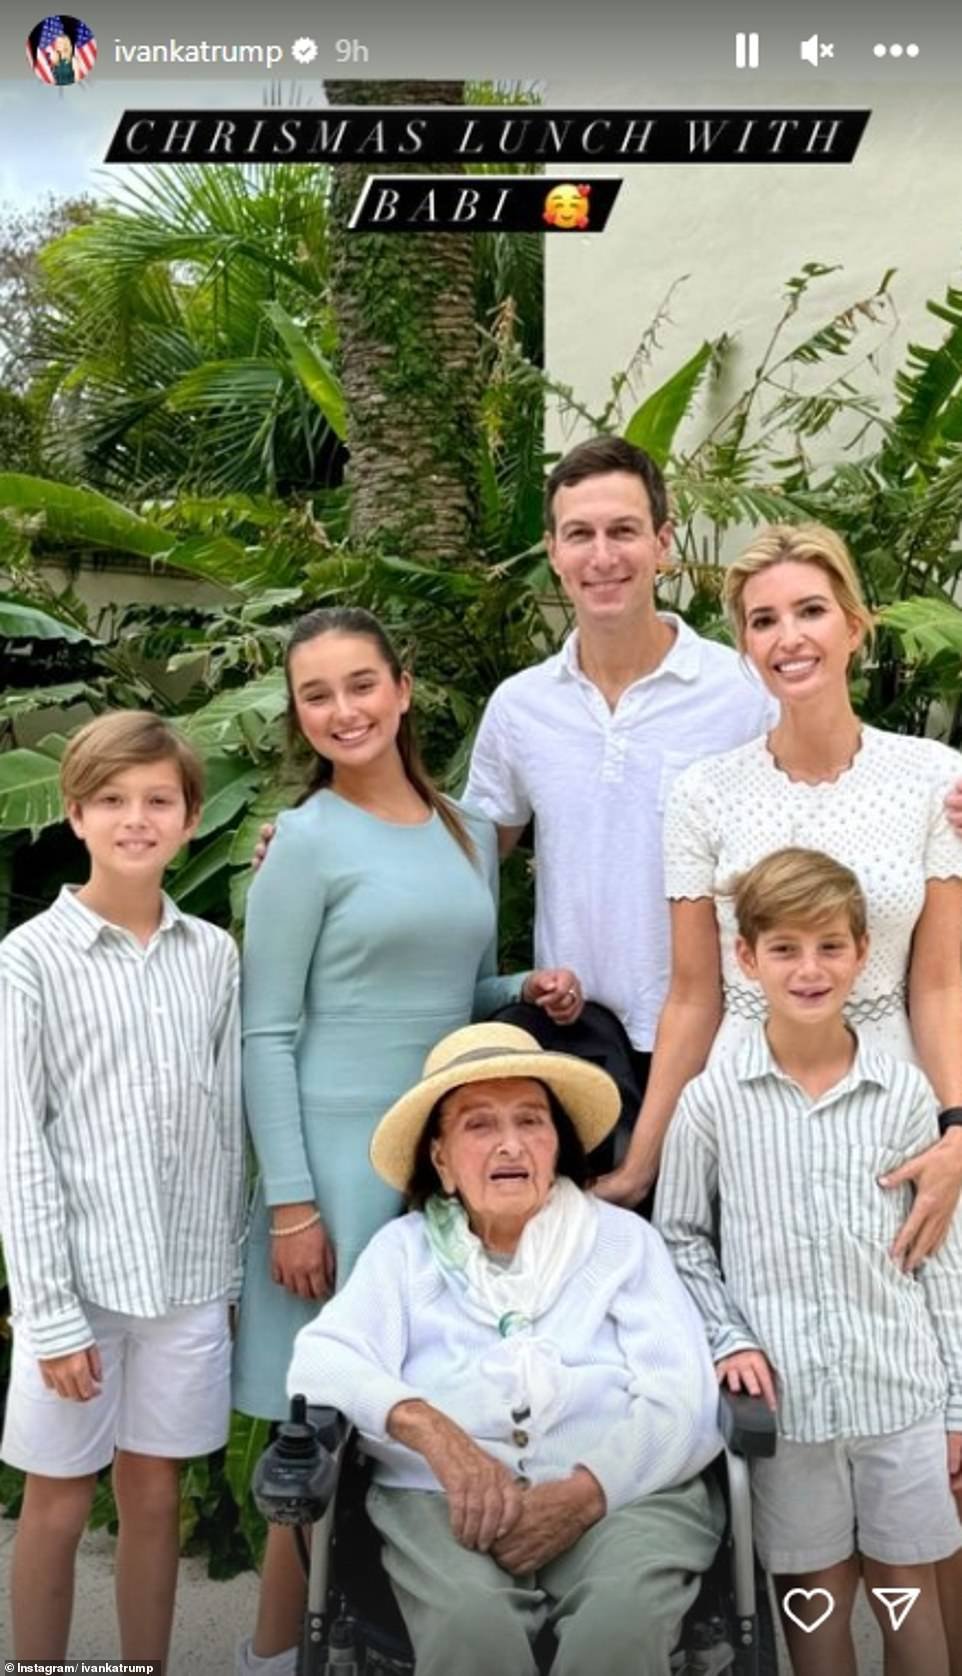 In one photo Ivanka, husband Jared Kushner, both 43, and their three children – Arabella, 12;  Joseph, 10;  and Theodore, 7 – all posed with the former first daughter's maternal grandmother as they celebrated Christmas lunch.  The entire family wore more casual attire than for the Mar-a-Lago celebrations, wearing shades of light green and white as they gathered around Ivanka's 97-year-old grandmother, Marie Zelníčková.  “Christmas lunch with Babi,” she captioned the image.